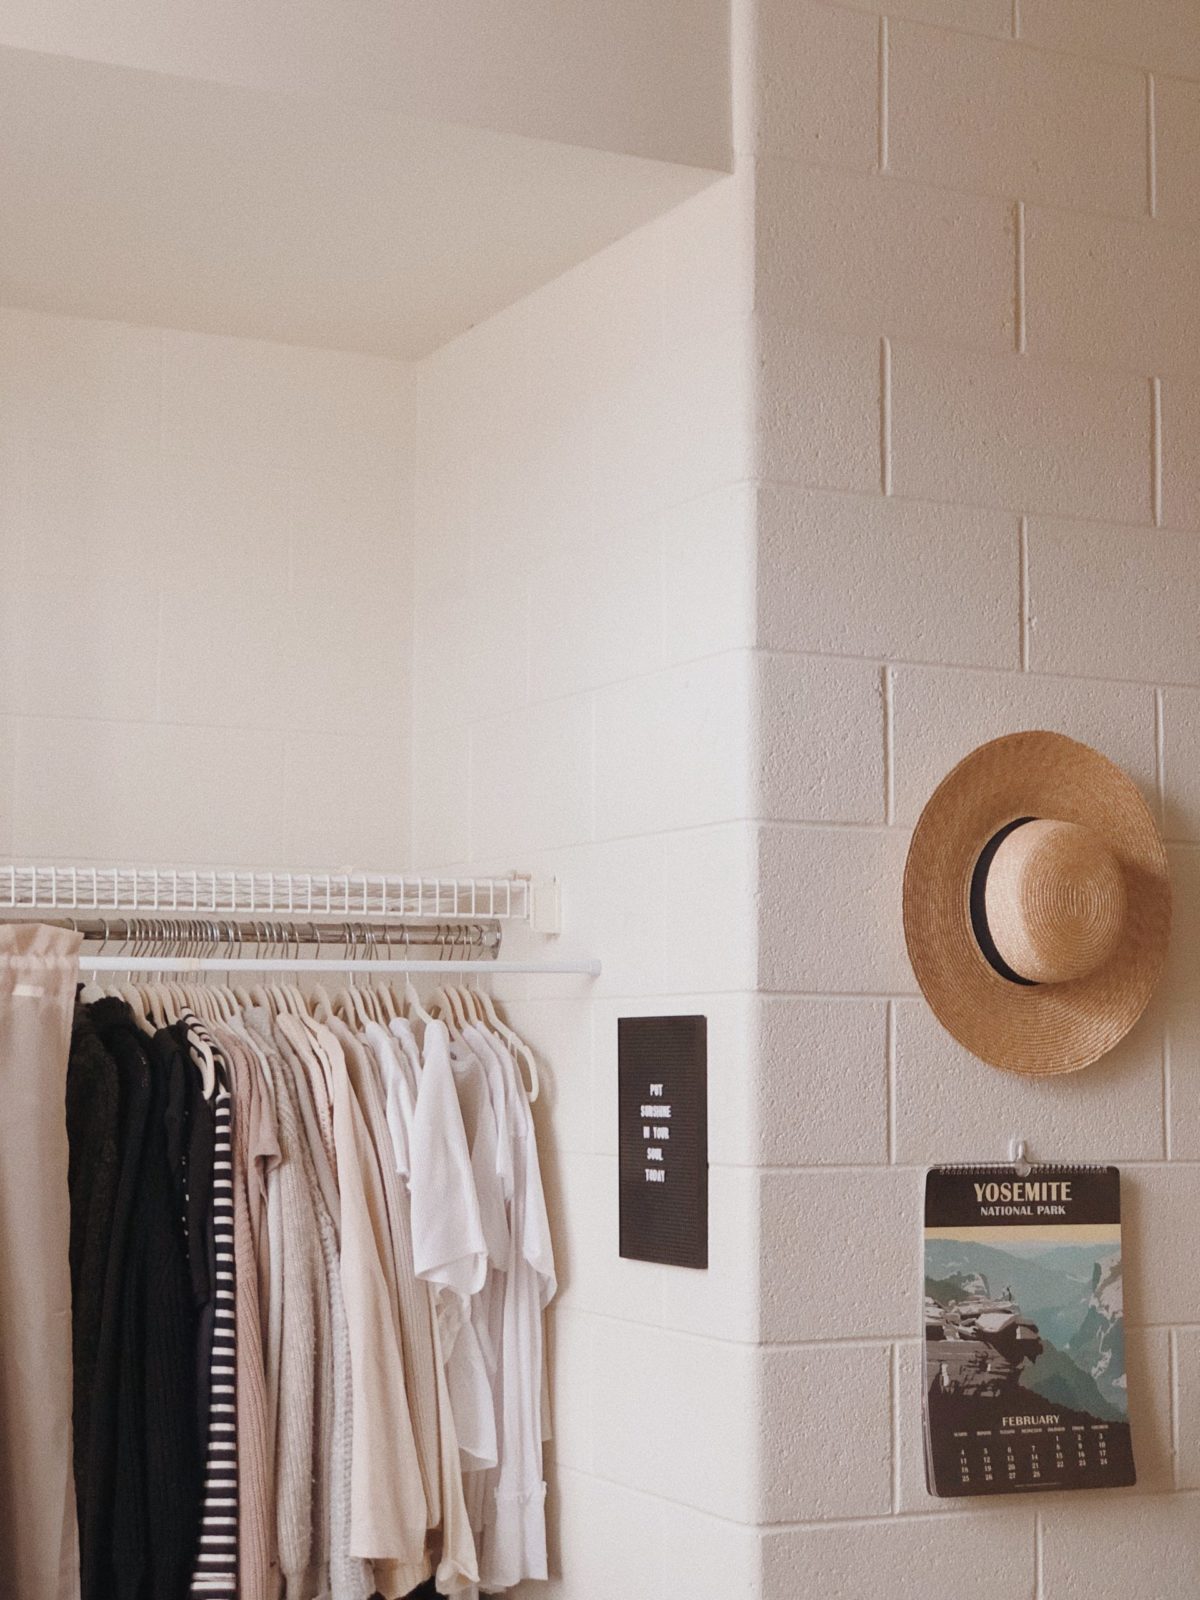 A rack of clothes and a hat hanging on a wall with a Yosemite poster underneath